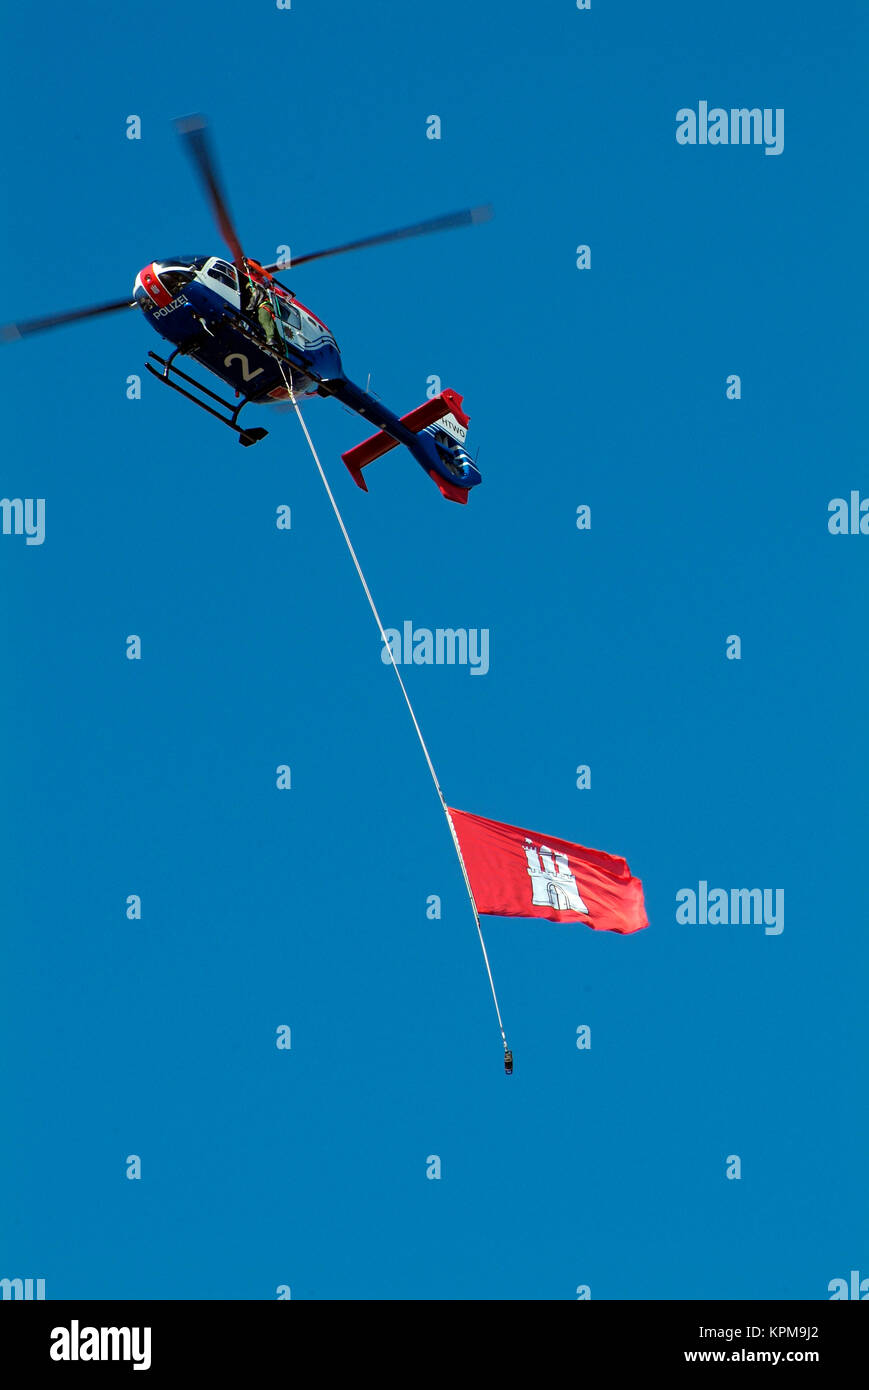 Hamburg, one of the most beautiful and most popular tourist destinations in the world. Hamburg flag on a police helicopter Stock Photo